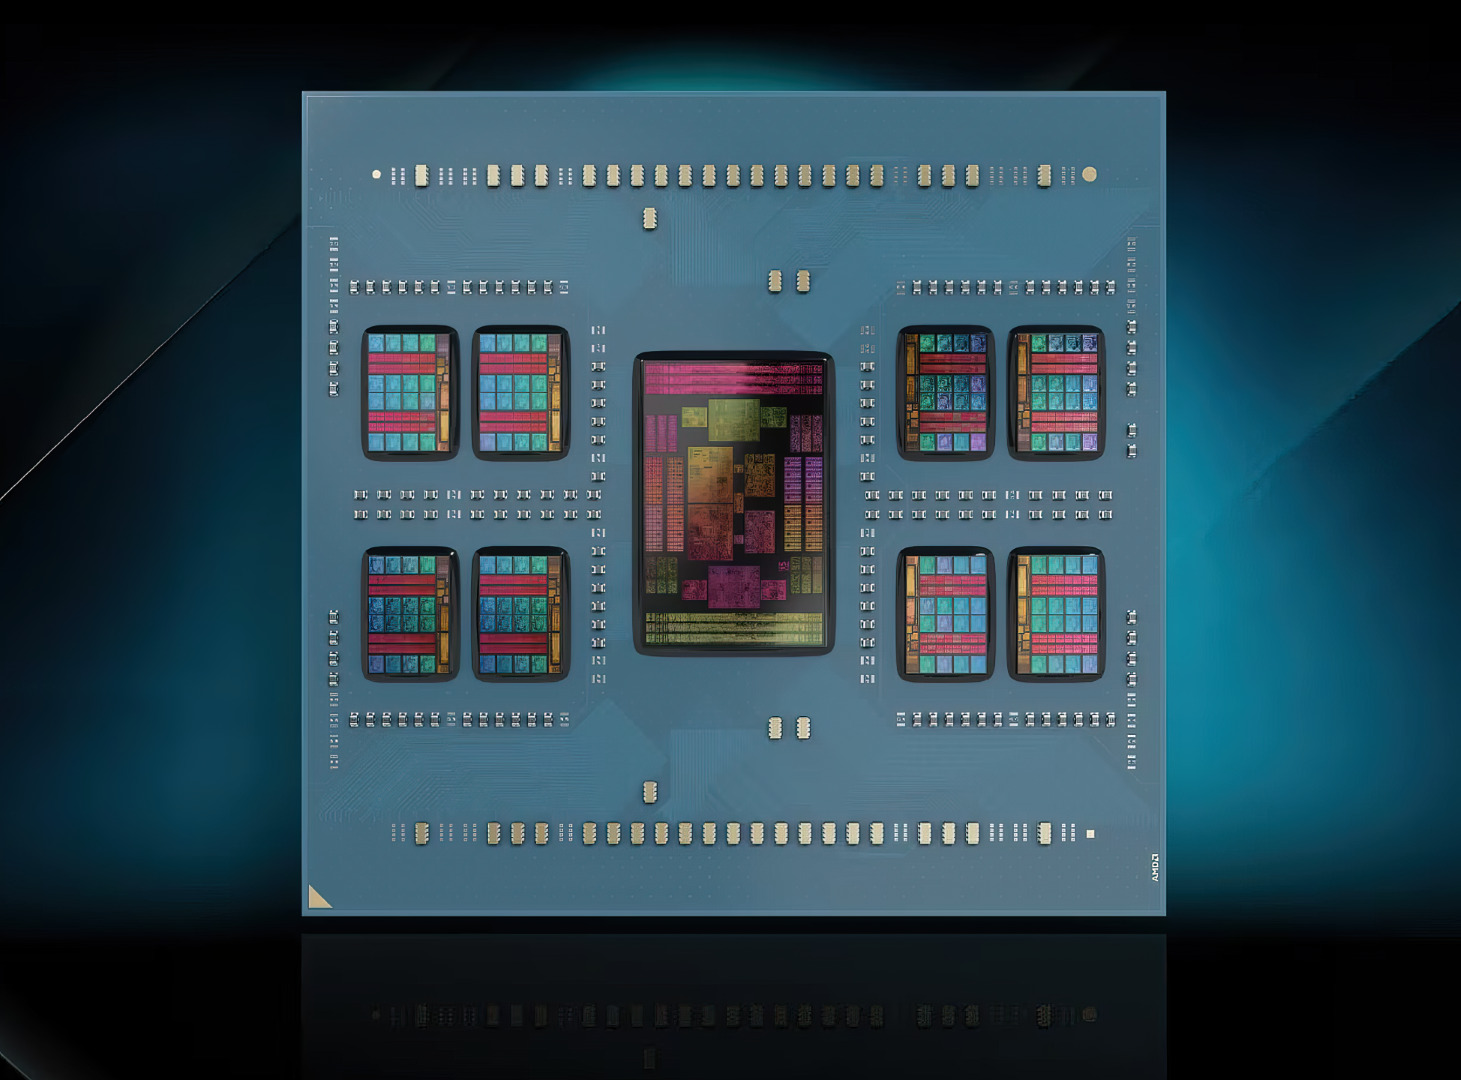 AMD EPYC Bergamo and Genoa-X CPUs Are Here: Up To 128 Cores, 256 Threads